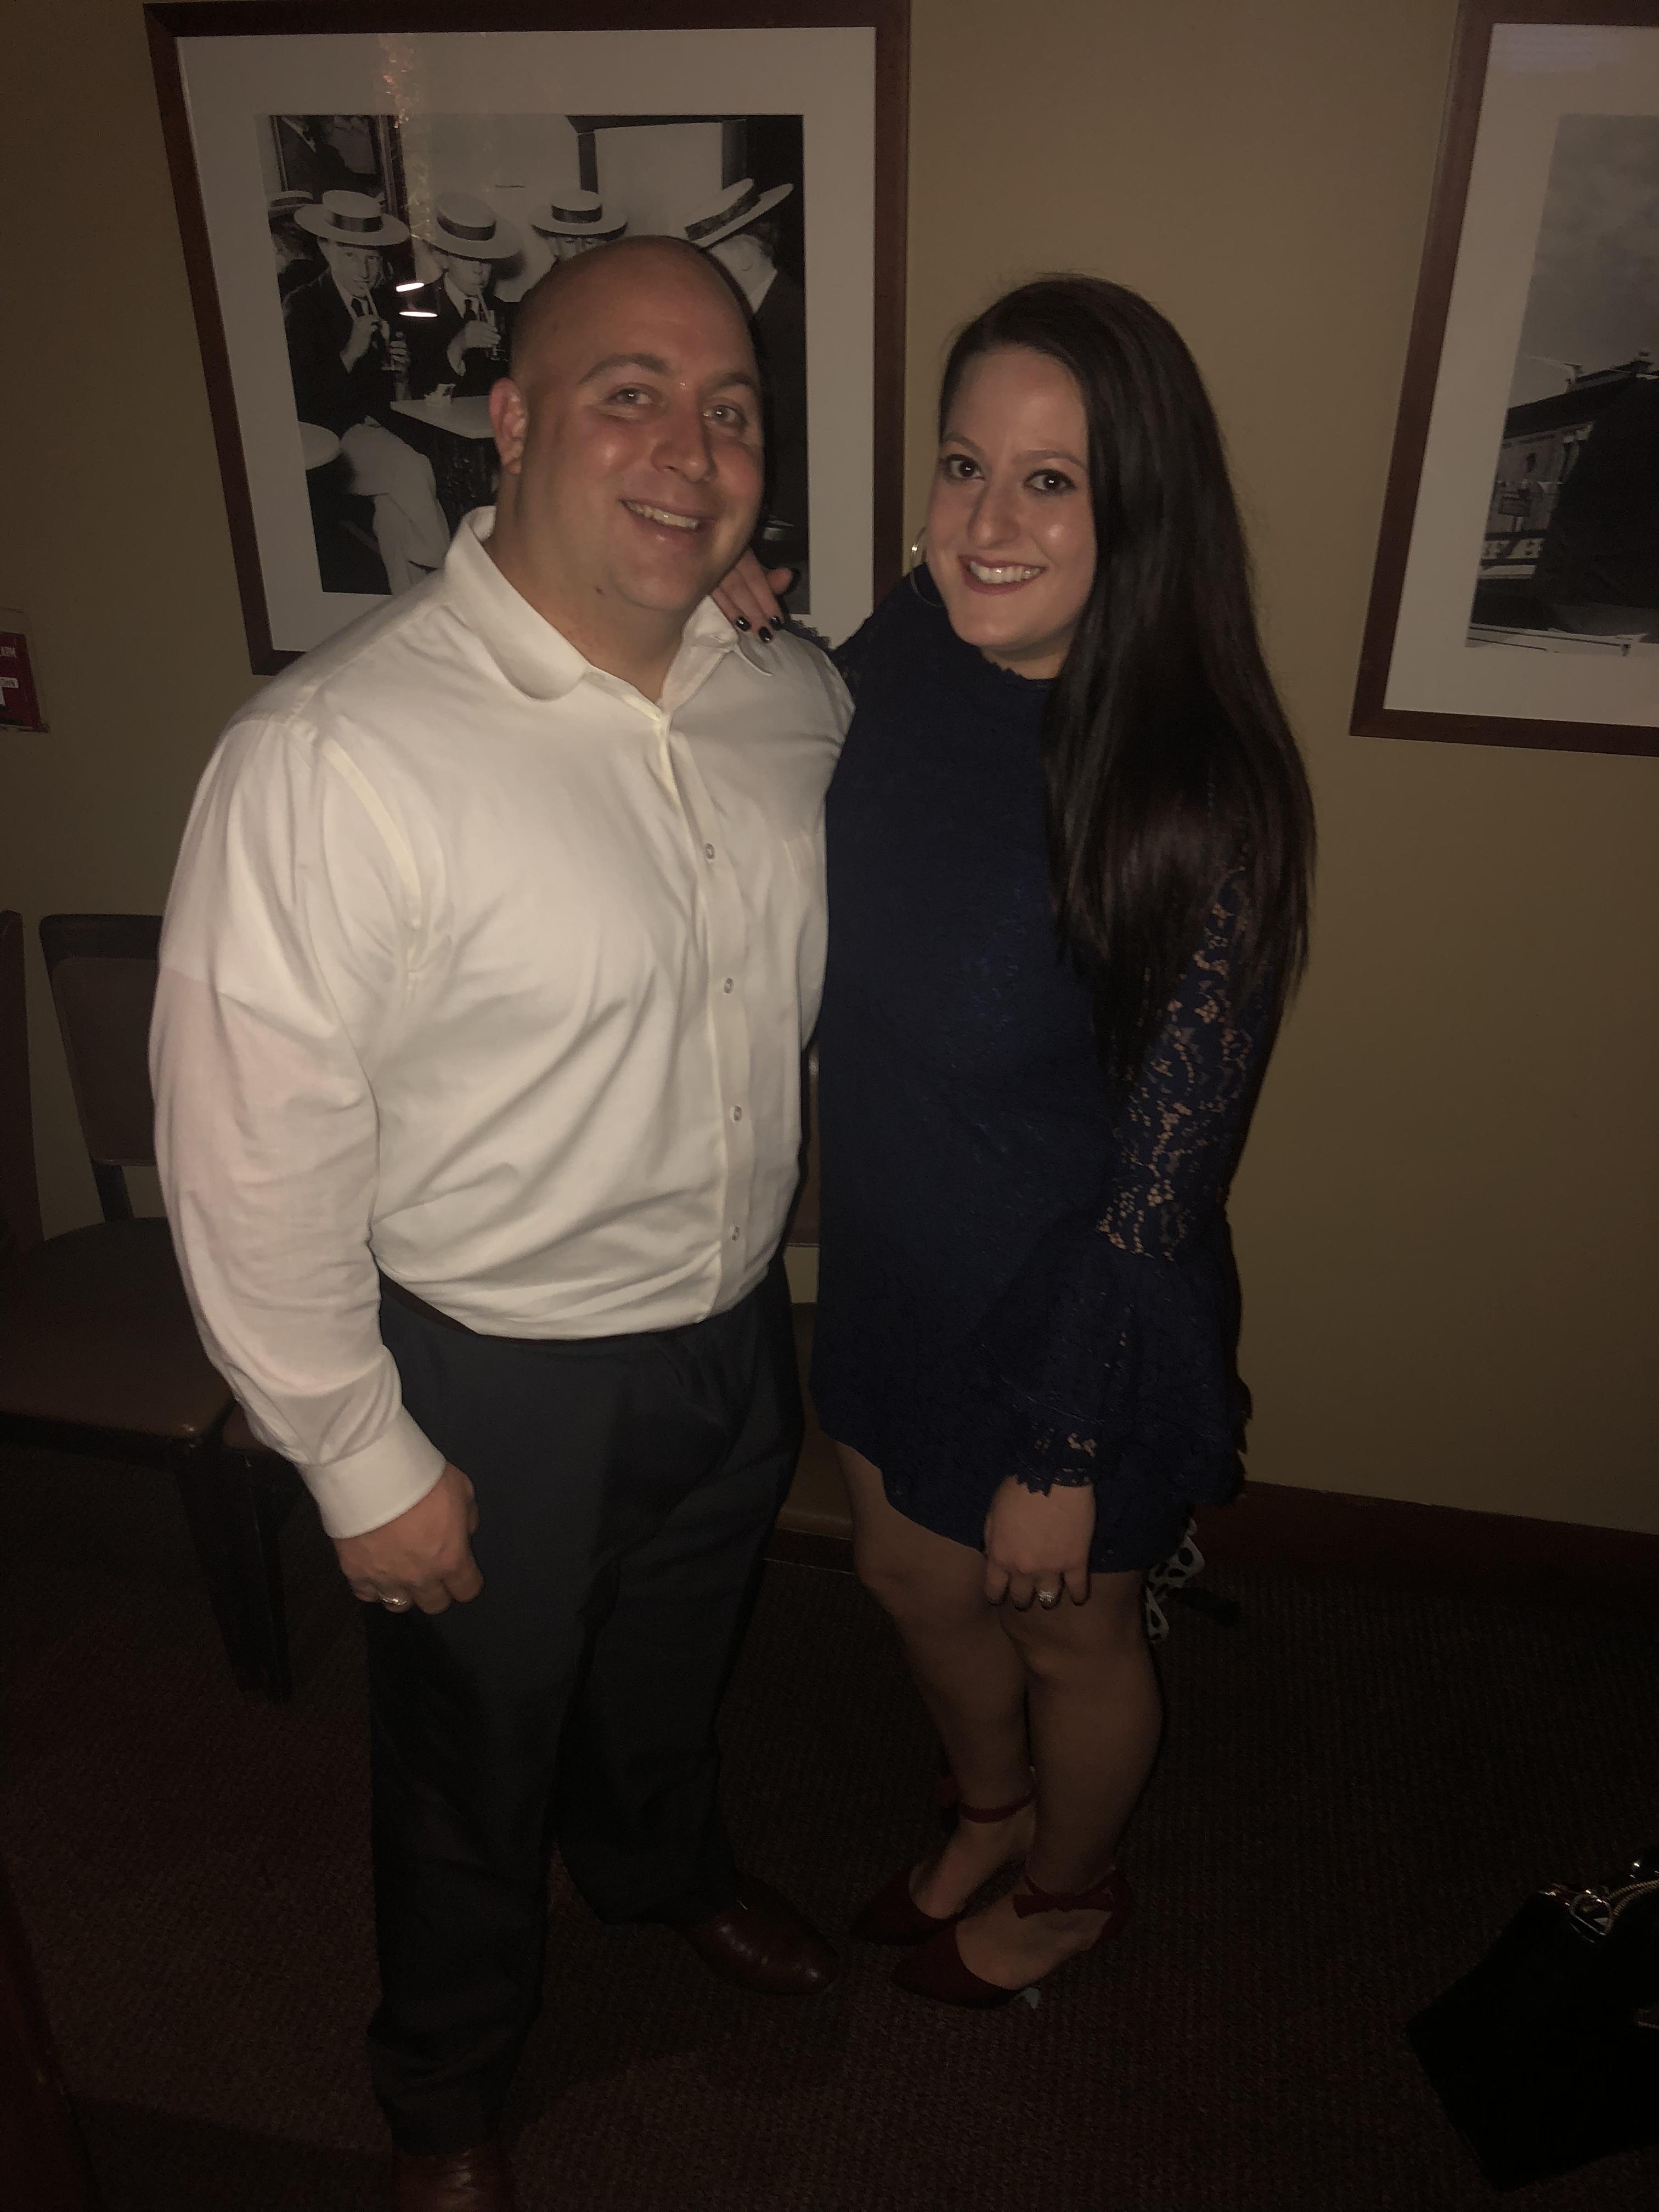 The Wedding Website of Samantha Petrillo and Eric Lester